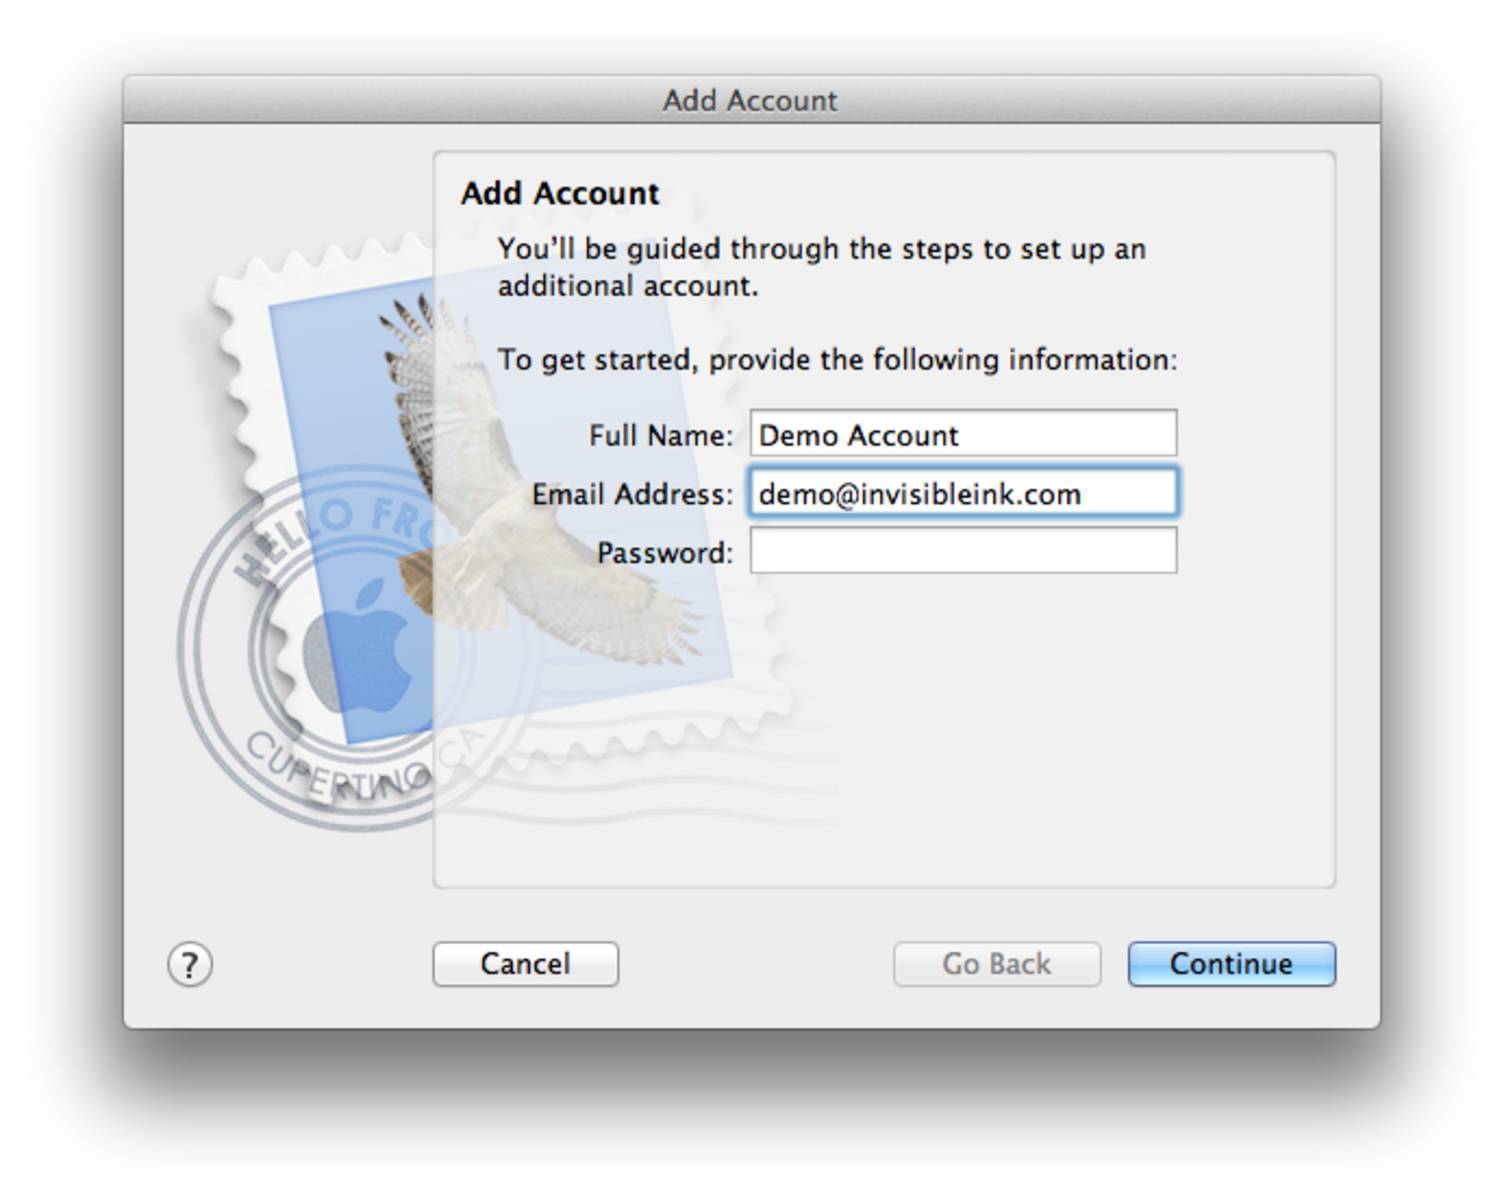 Step 2 » Enter your name and email address, then click Continue.